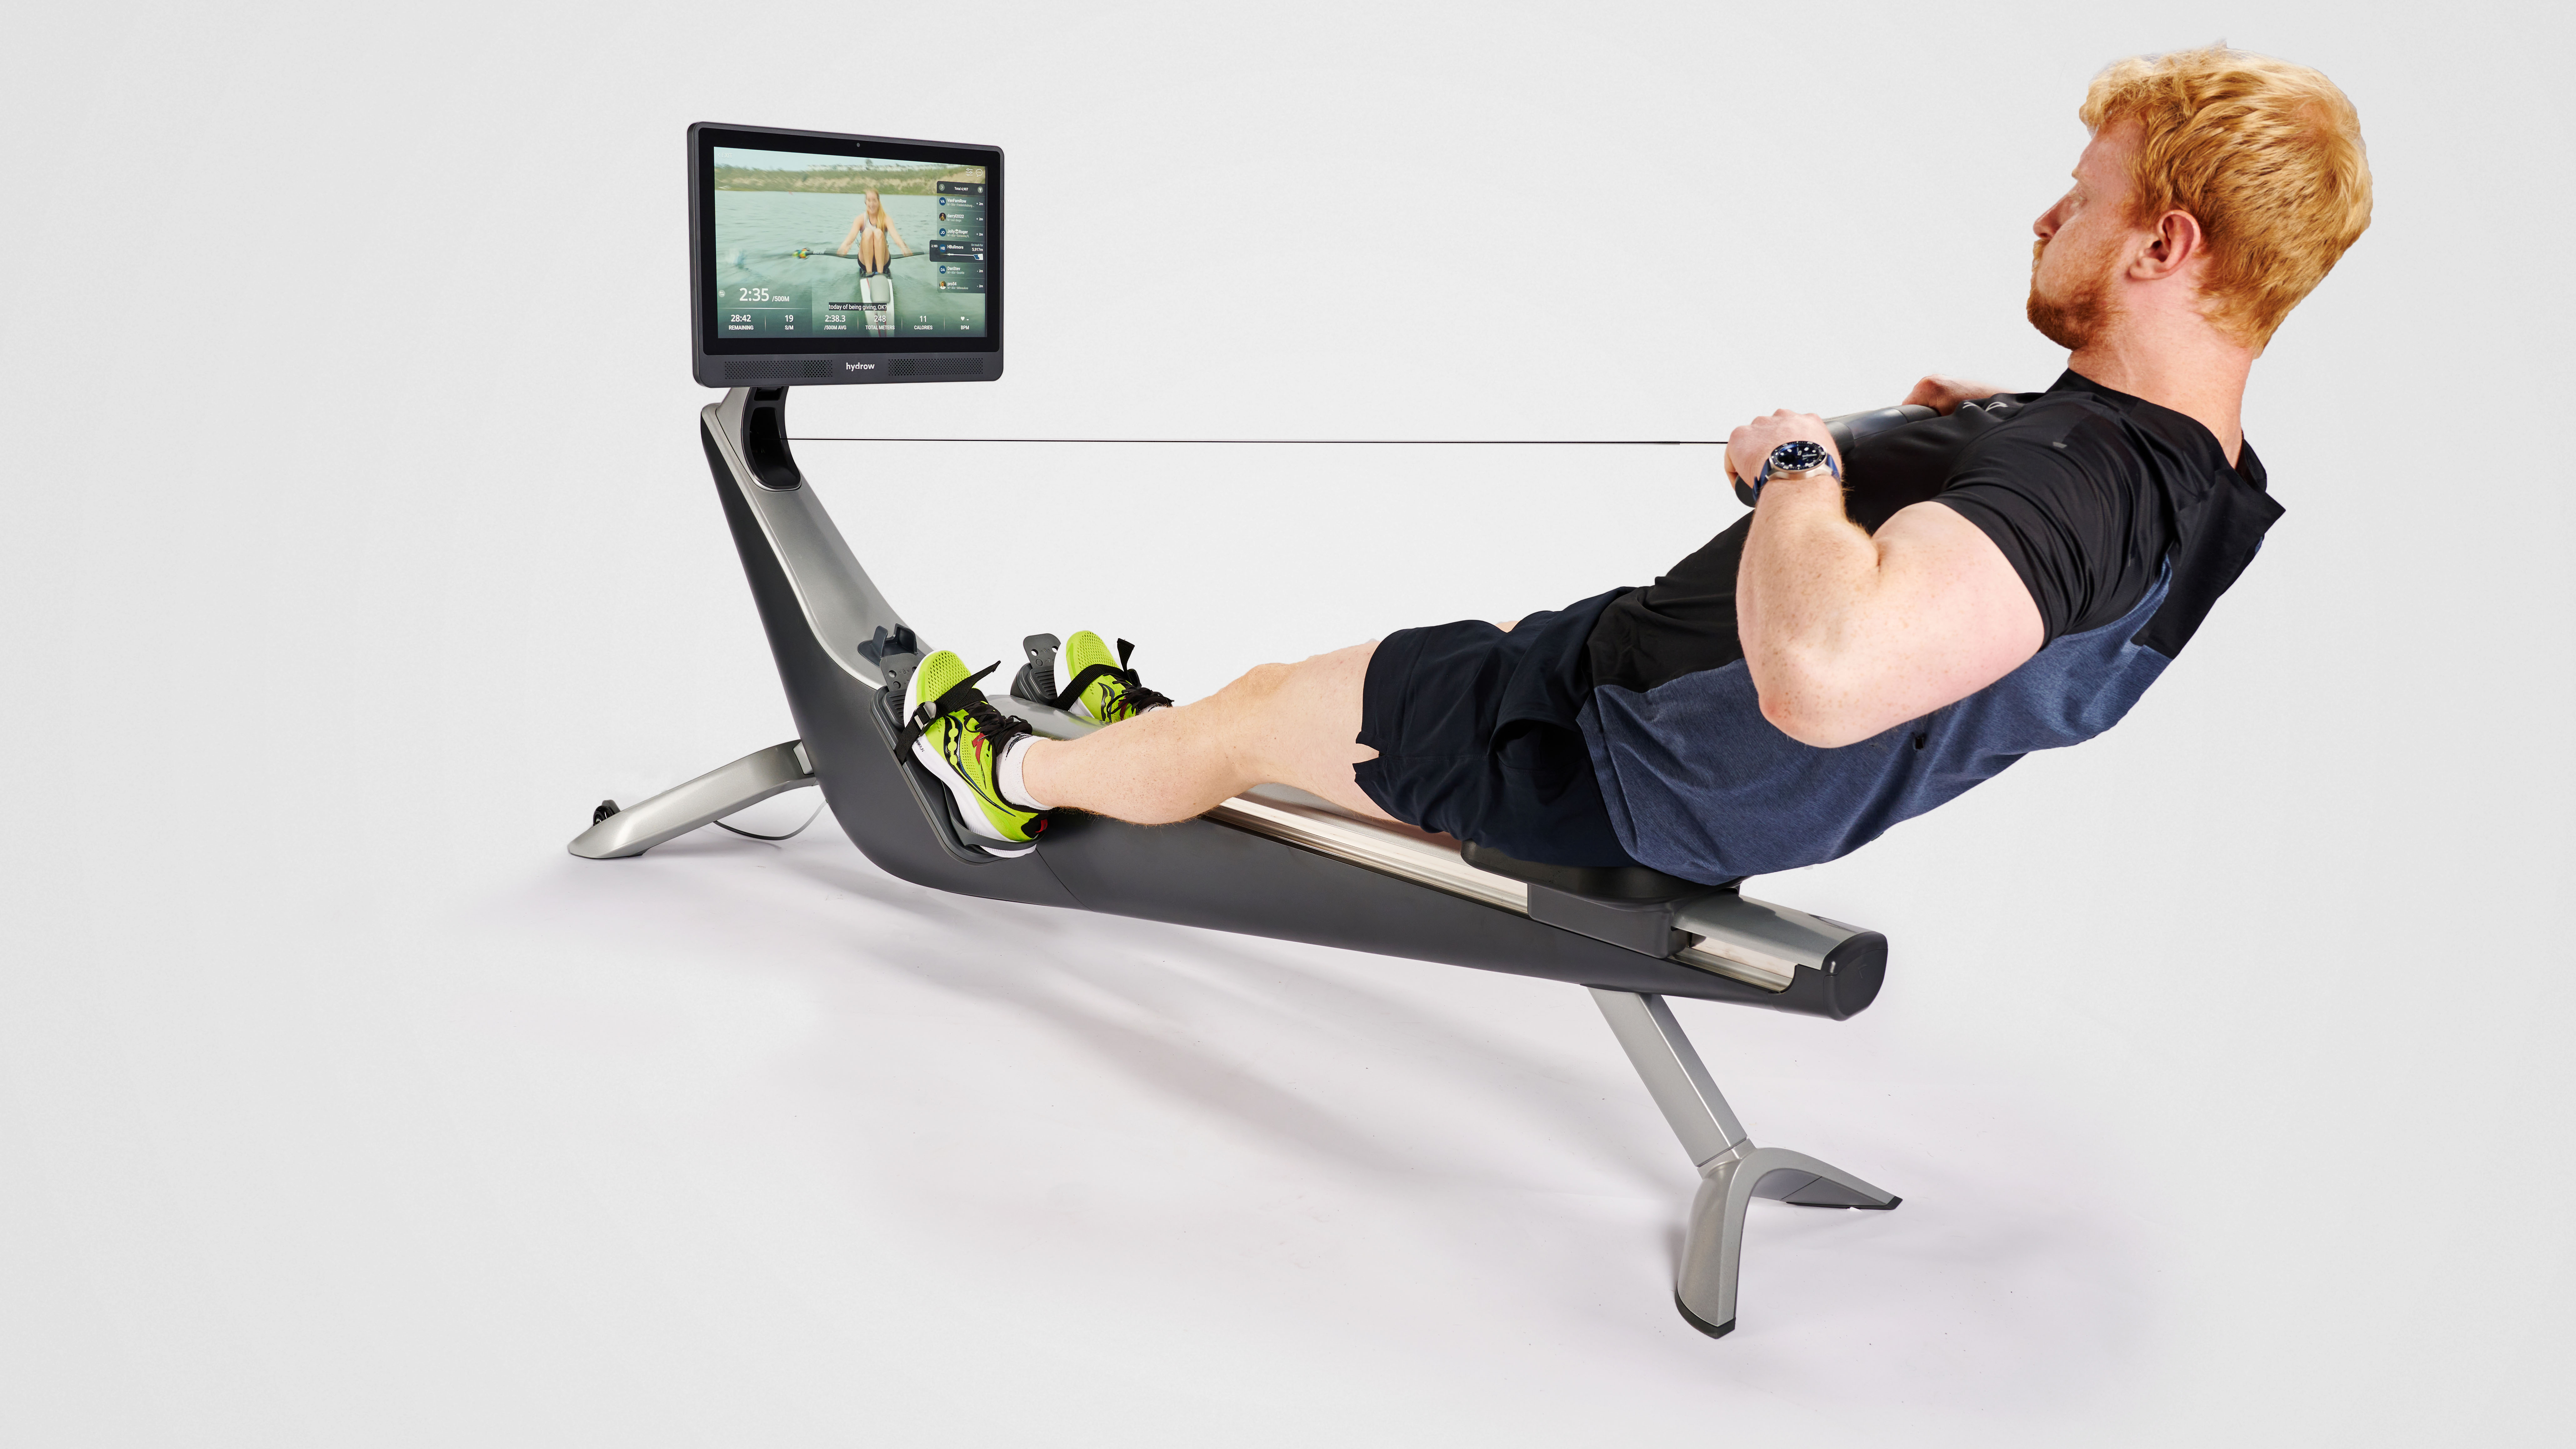 Live Science training writer Harry Bullmore is testing out the Hydrow rowing machine